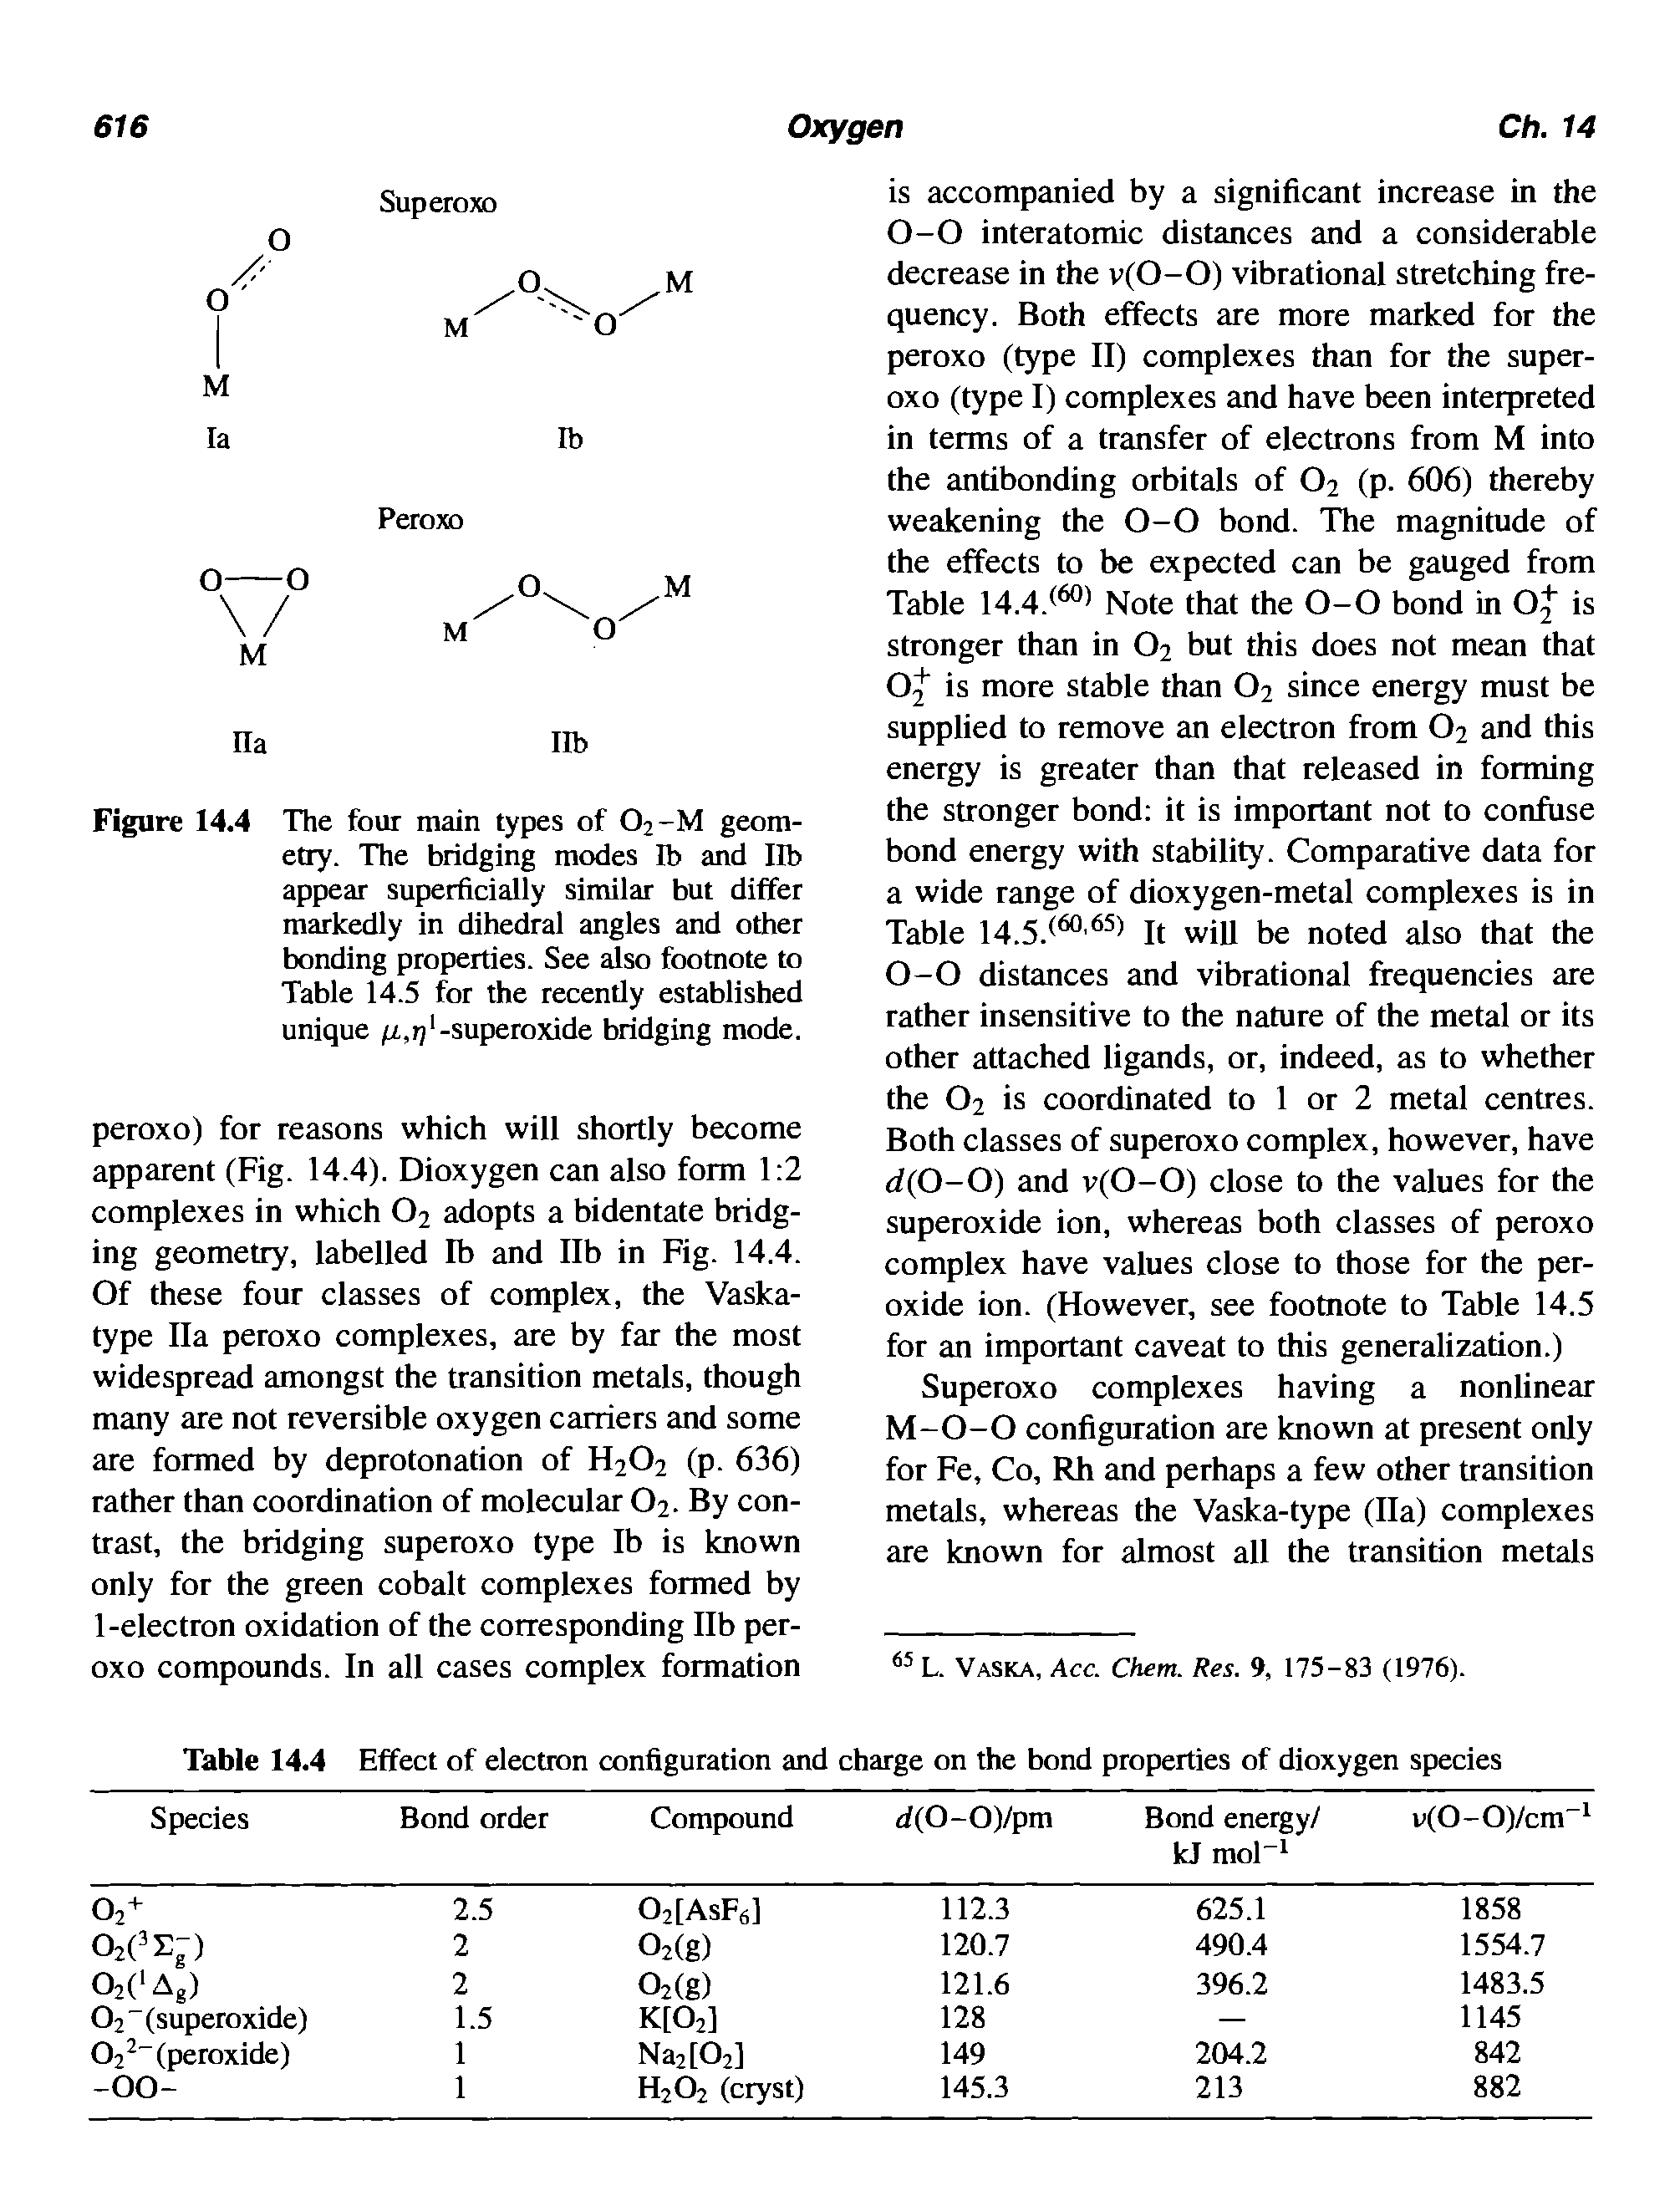 Figure 14.4 The four main types of O2-M geometry. The bridging modes Ib and lib appear superficially similar but differ markedly in dihedral angles and other bonding properties. See also footnote to Table 14.5 for the recently established unique /Lt.rj -superoxide bridging mode.